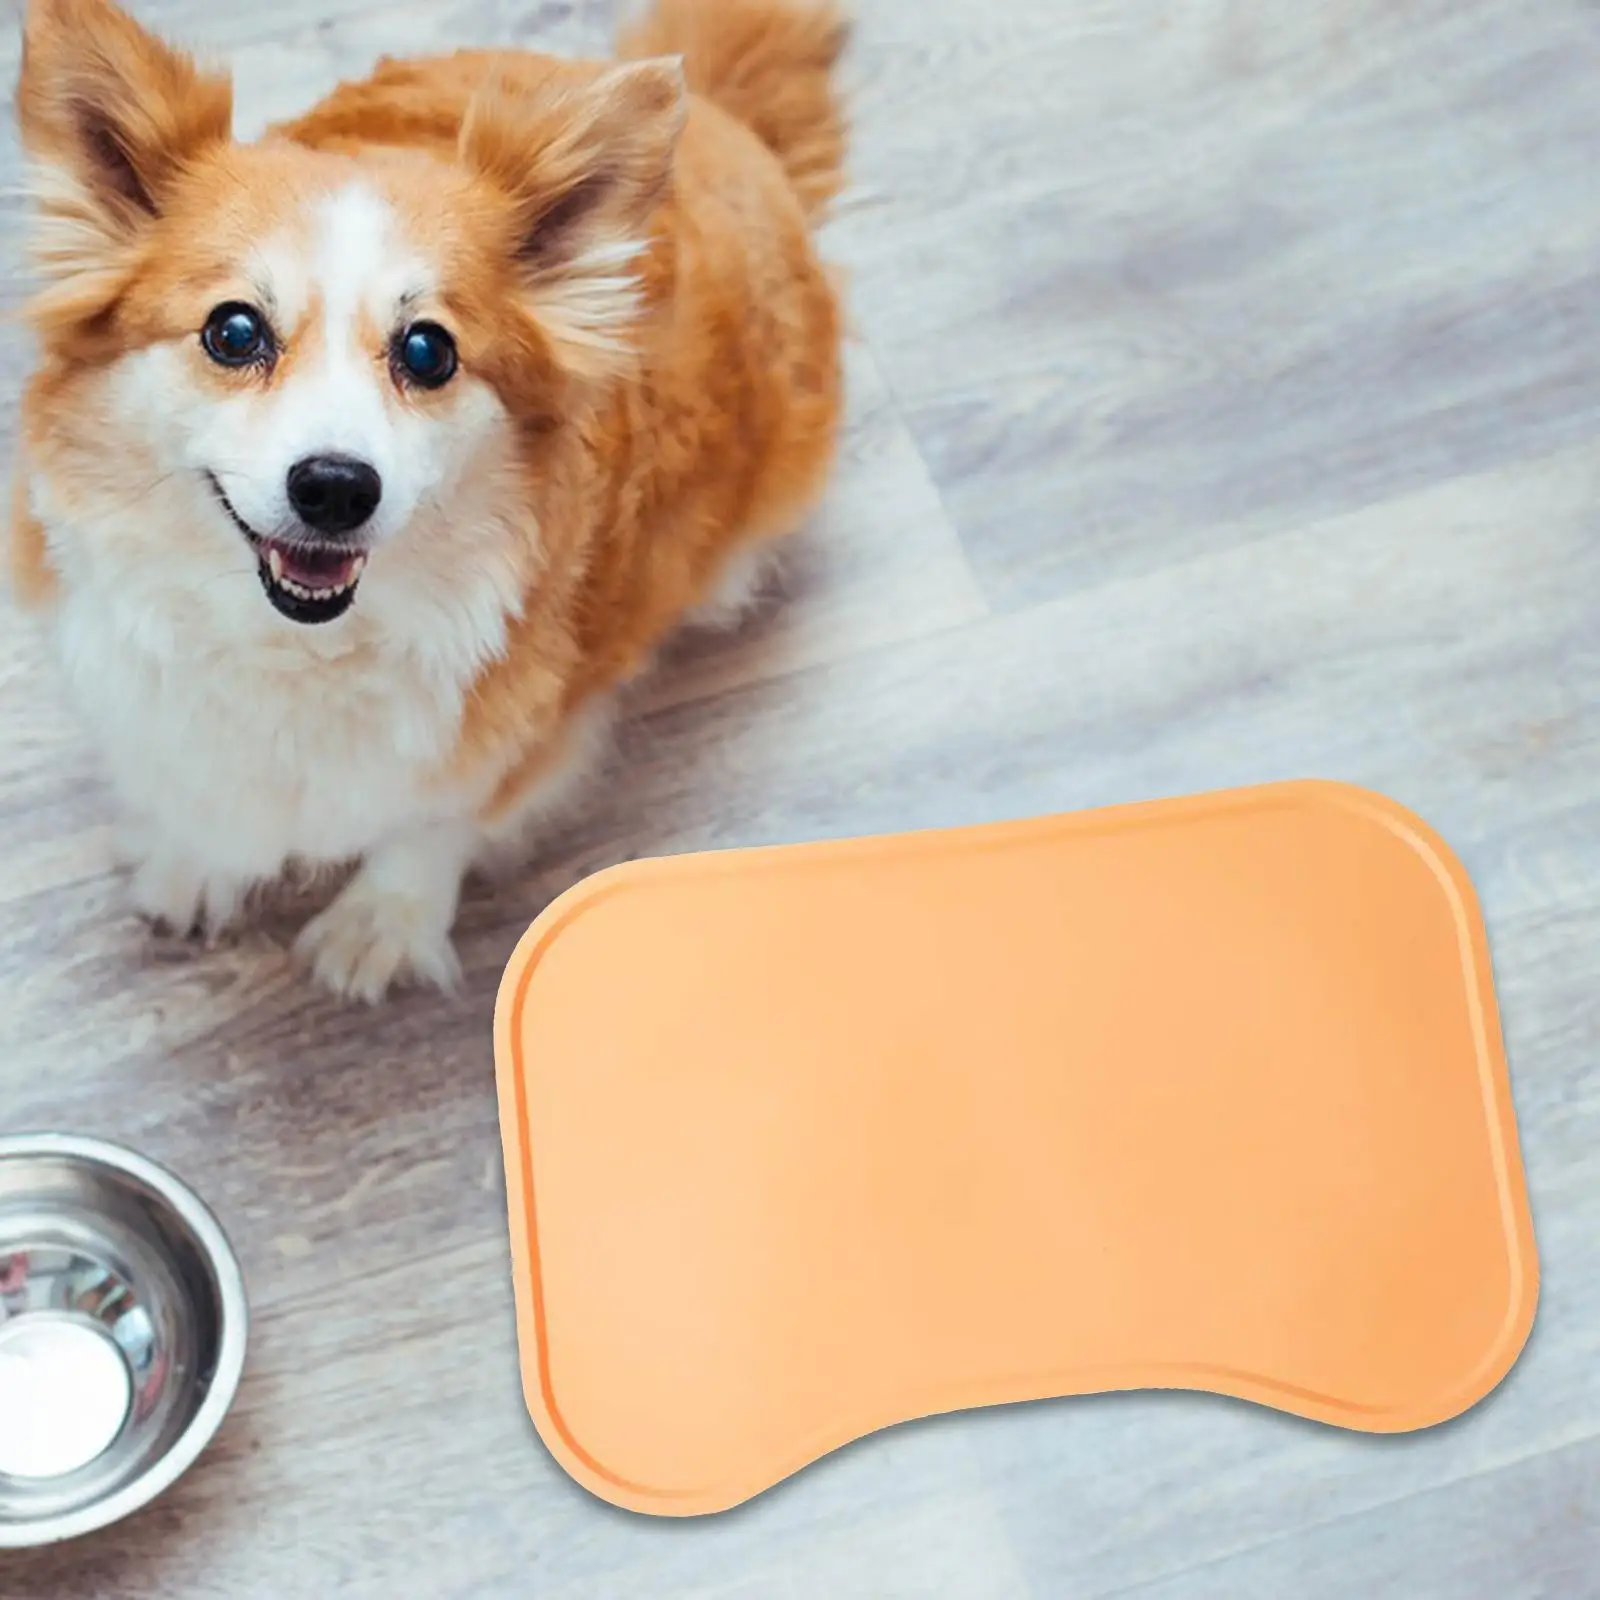 Pet Dog Food Mat Feeding Mat Placemat Water Bowl Mat Non Spill Waterproof Dish Tray Pad for Dogs and Cats Puppy Supplies